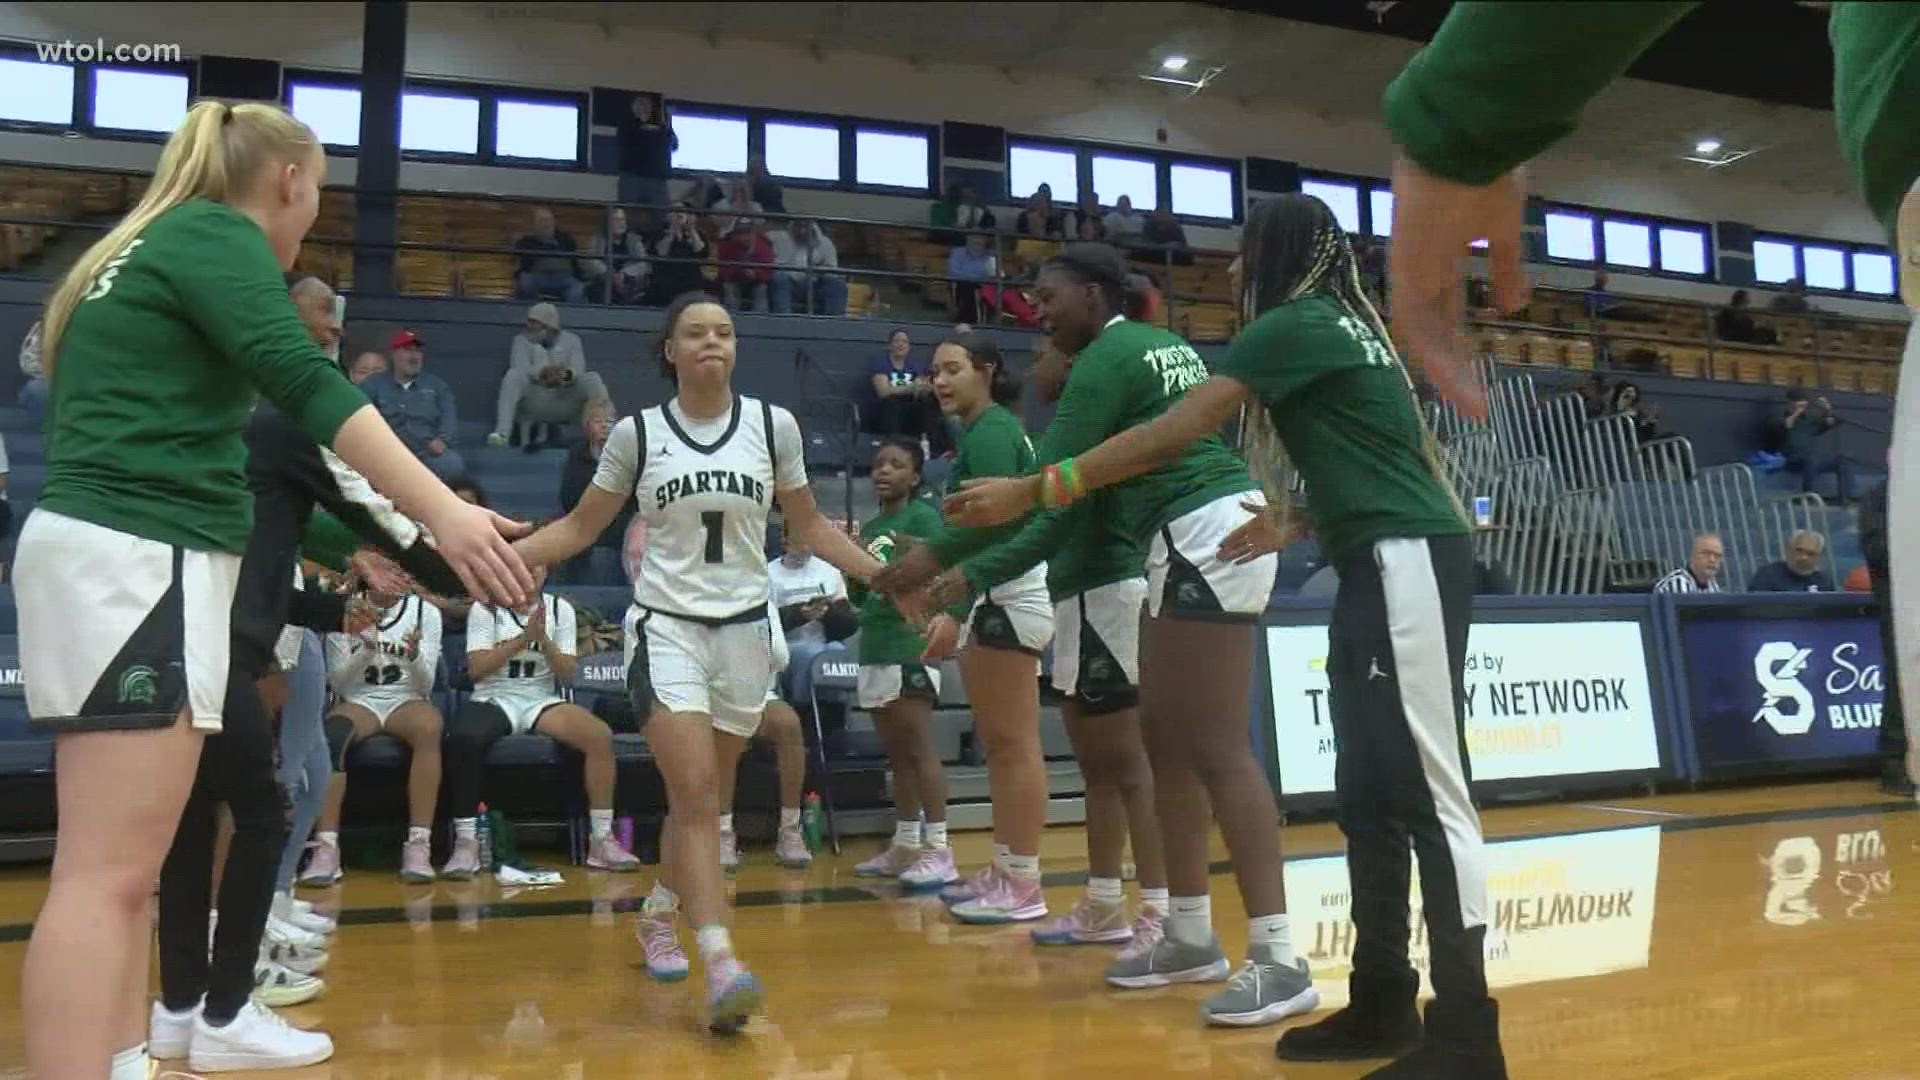 Highlights from Anthony Wayne, Start and Central Catholic in the regional semifinal. Plus boys district semifinal action from across northwest Ohio.